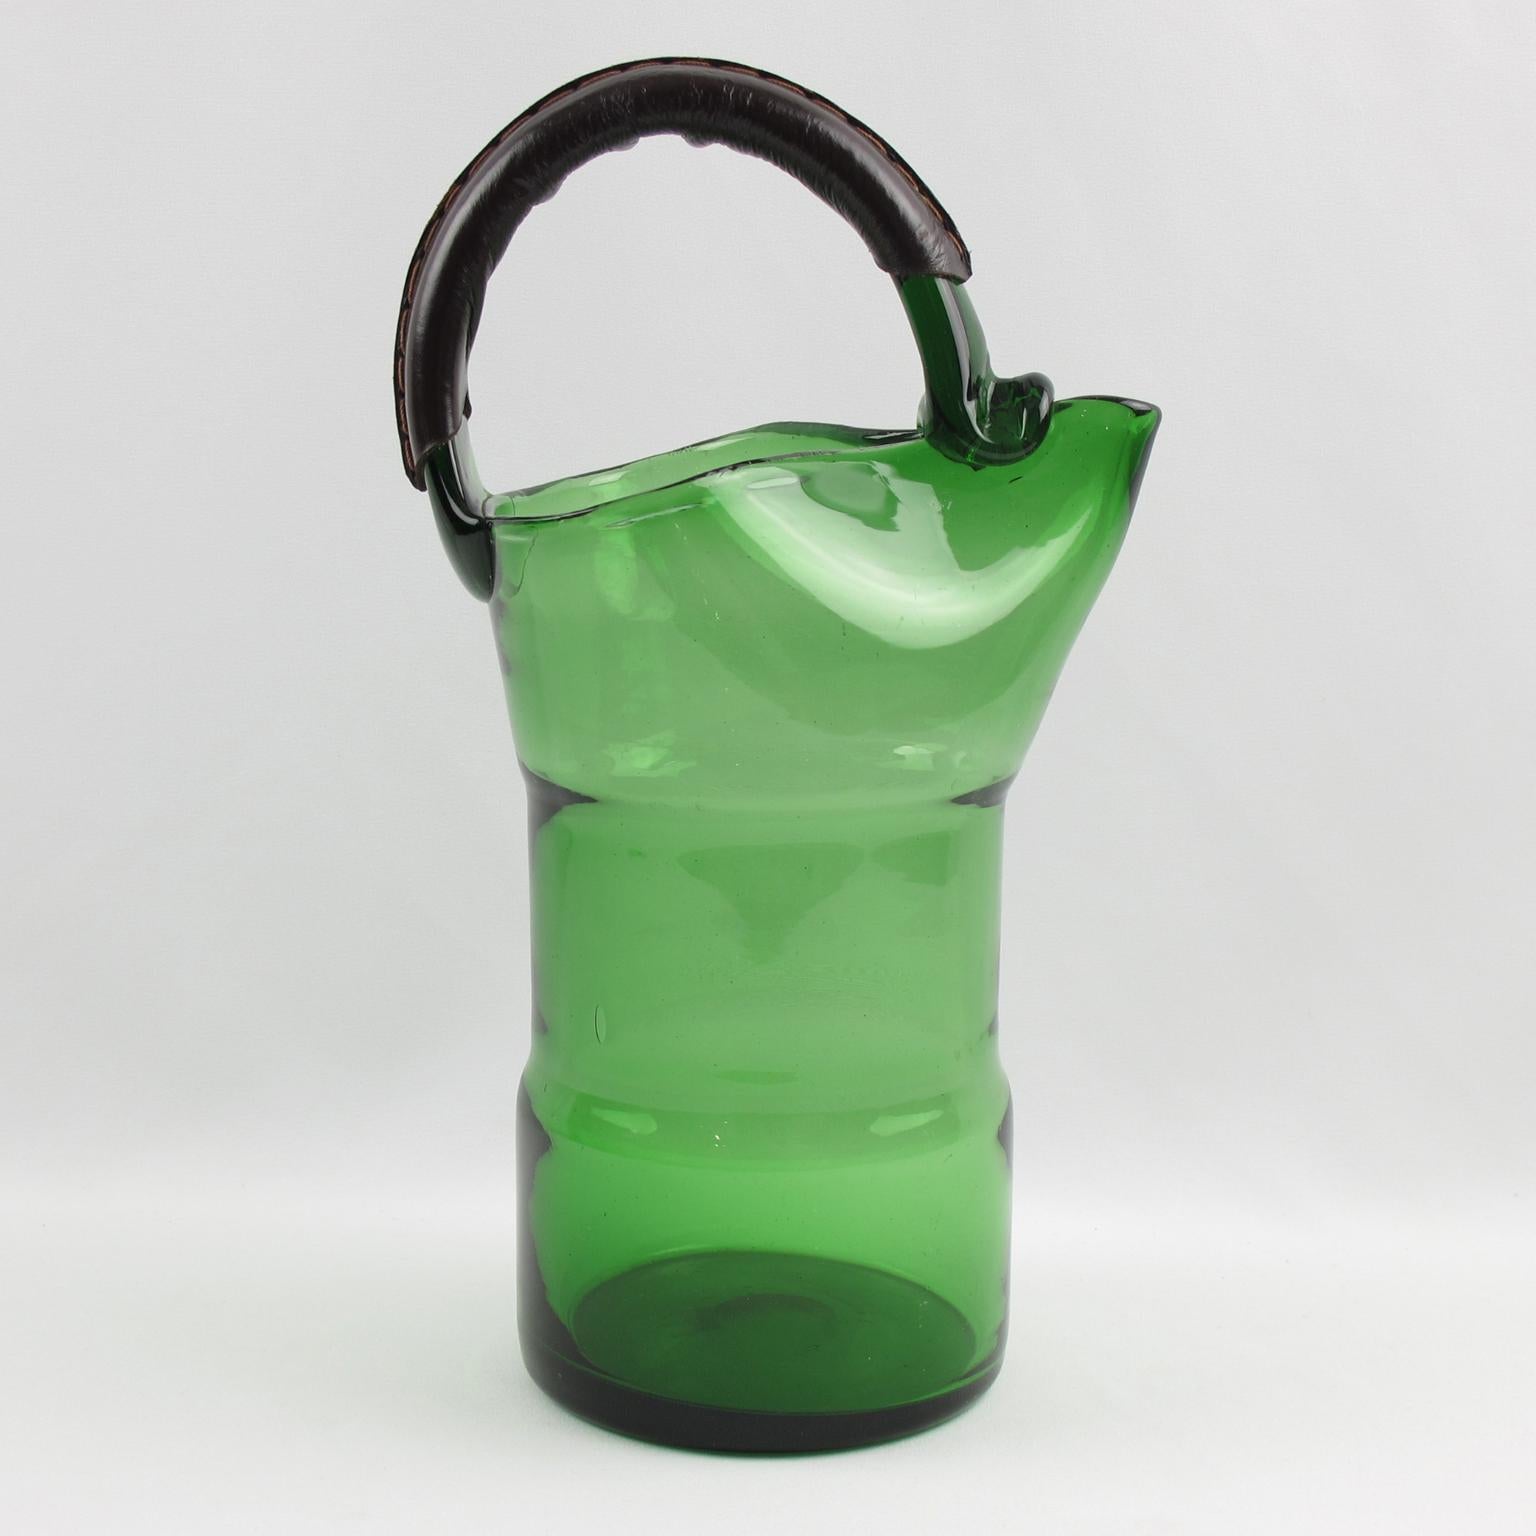 Stunning modernist Italian mouth-blown glass pitcher. Perfect for barware use and to serve lemonade or water, this lovely green glass pitcher is accented with a very unusual dark brown handstitched leather handle. Polished pontil mark on the